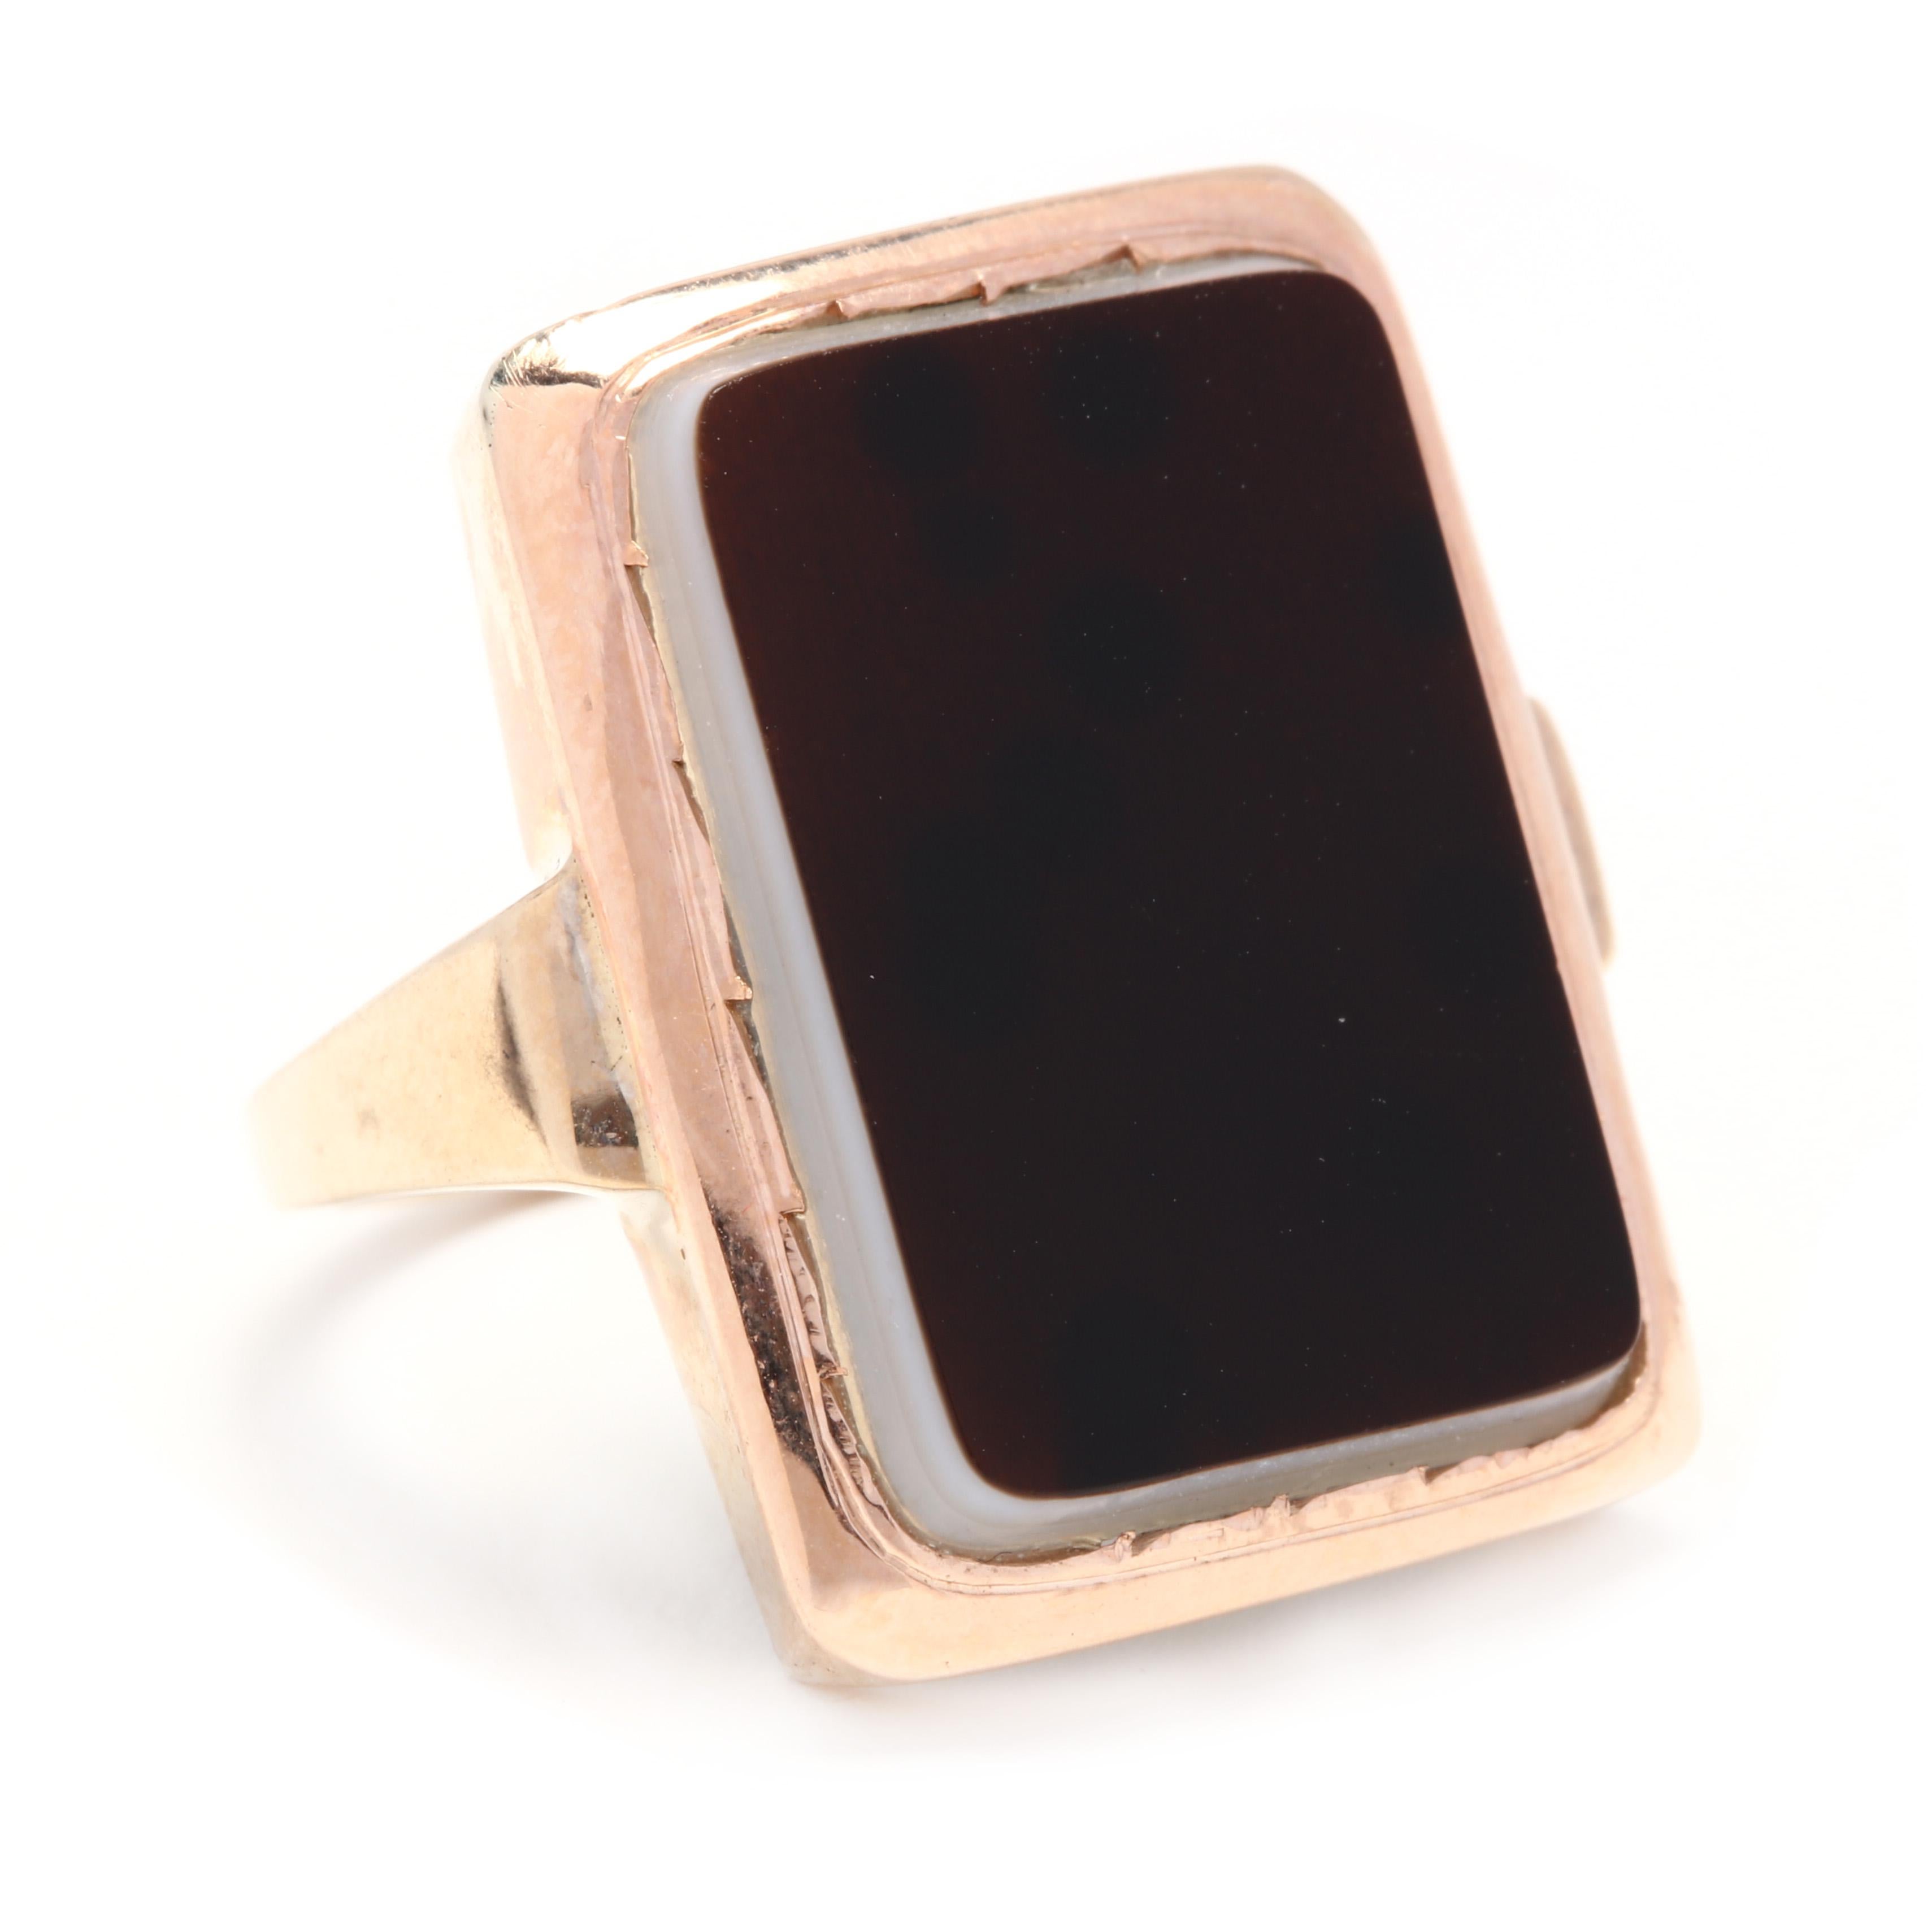 14k yellow gold large rectangular sardonyx ring. A vintage men's or women's ring with a rectangle-shaped sardonyx that measures 20.5x14.9mm. It is a great piece as is or could be engraved with an initial. 

Stones:
- sardonyx
- rectangular tablet, 1